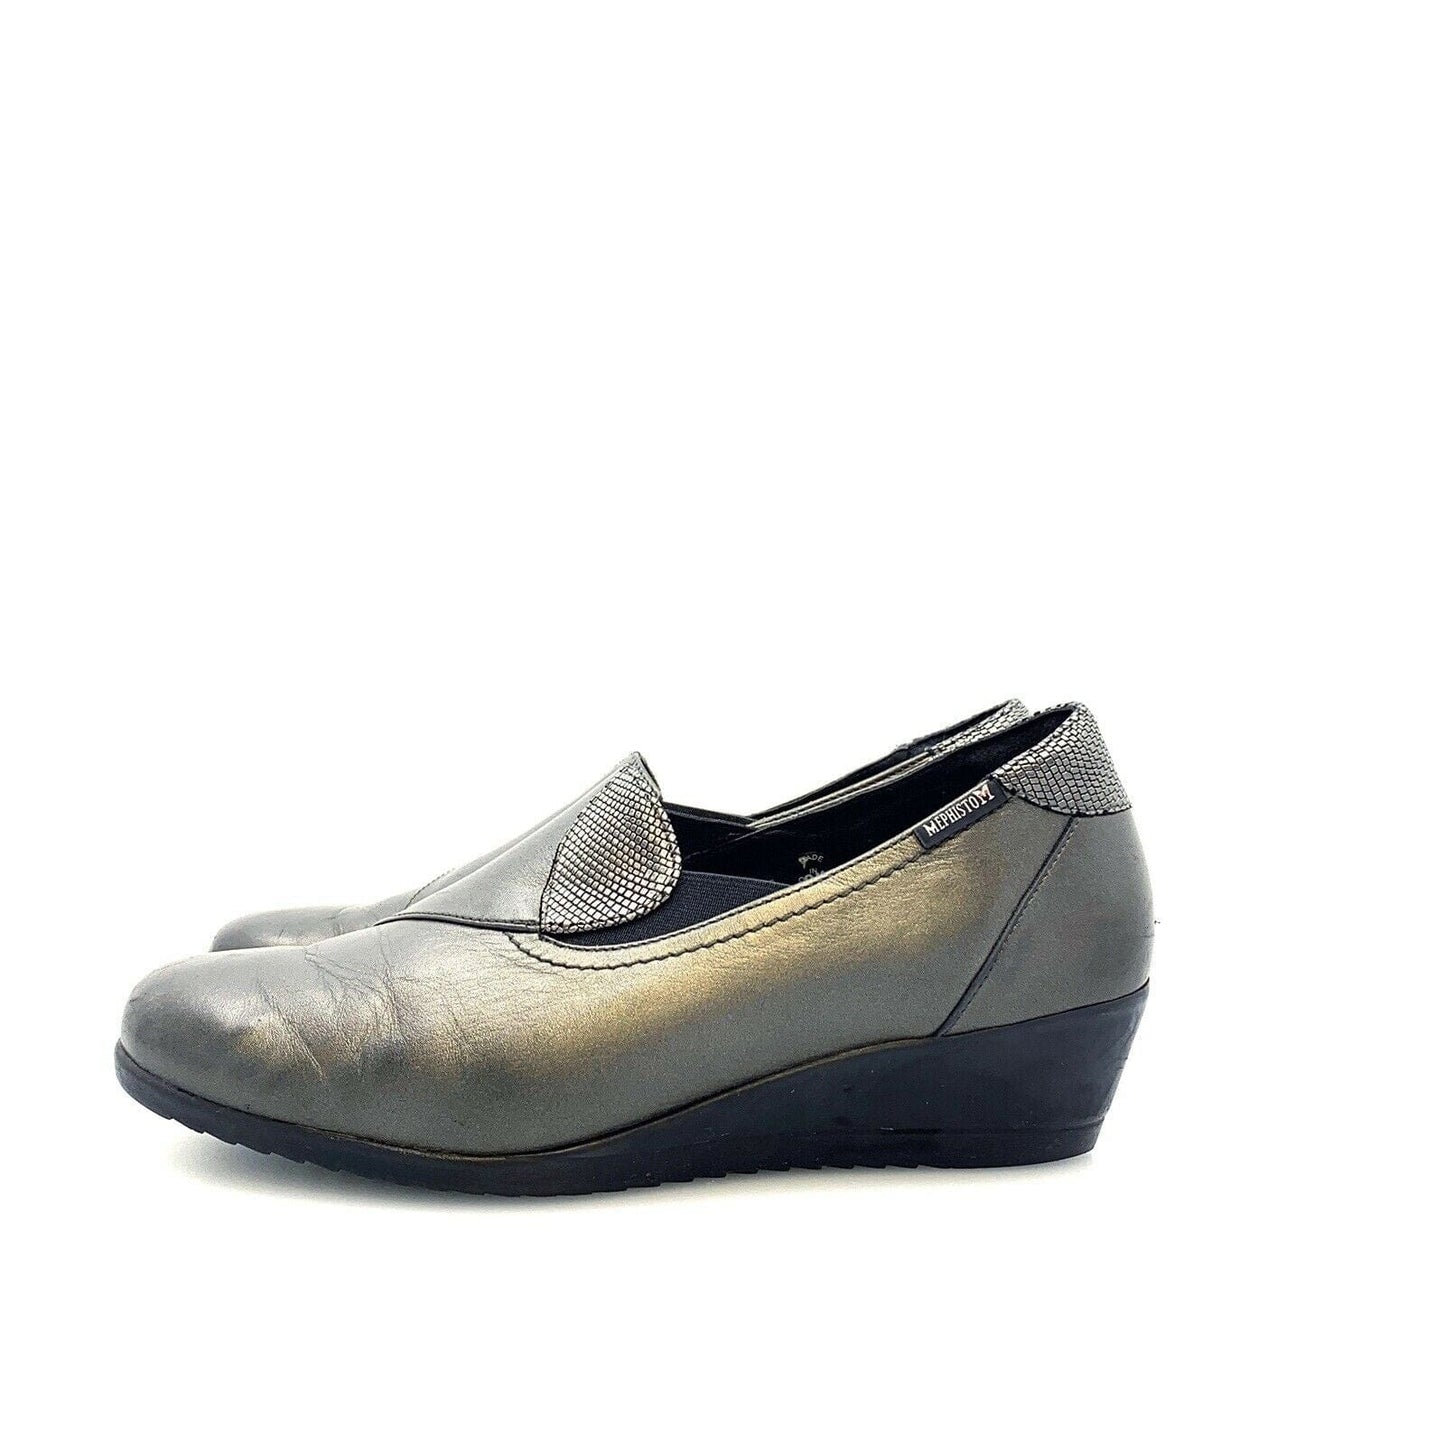 MEPHISTO Womens Size 9.5 Gray 'Giacinta' Leather Wedge Pumps Comfort